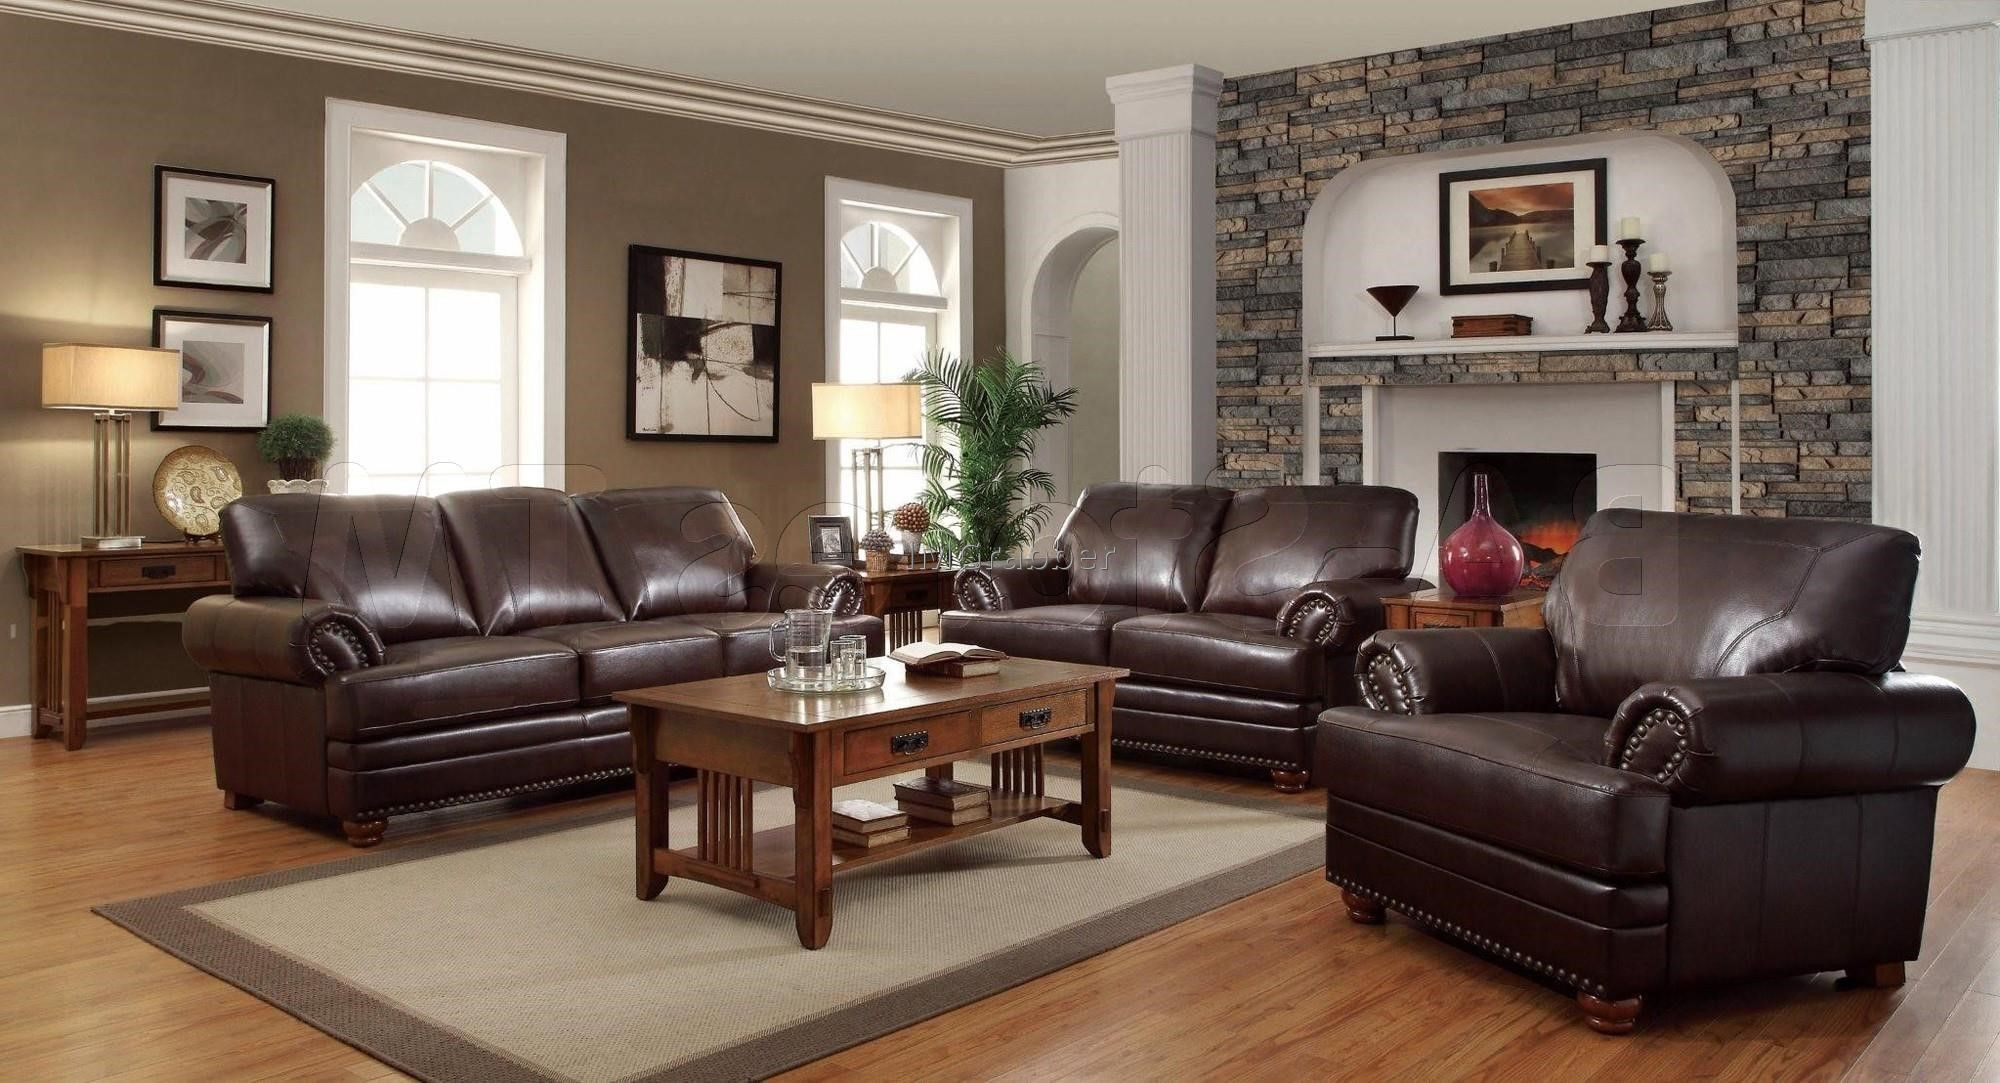 Living Rooms Ideas Brown Sofa
 Attractive Brown Couch Living Room Sofa Decorating Ideas